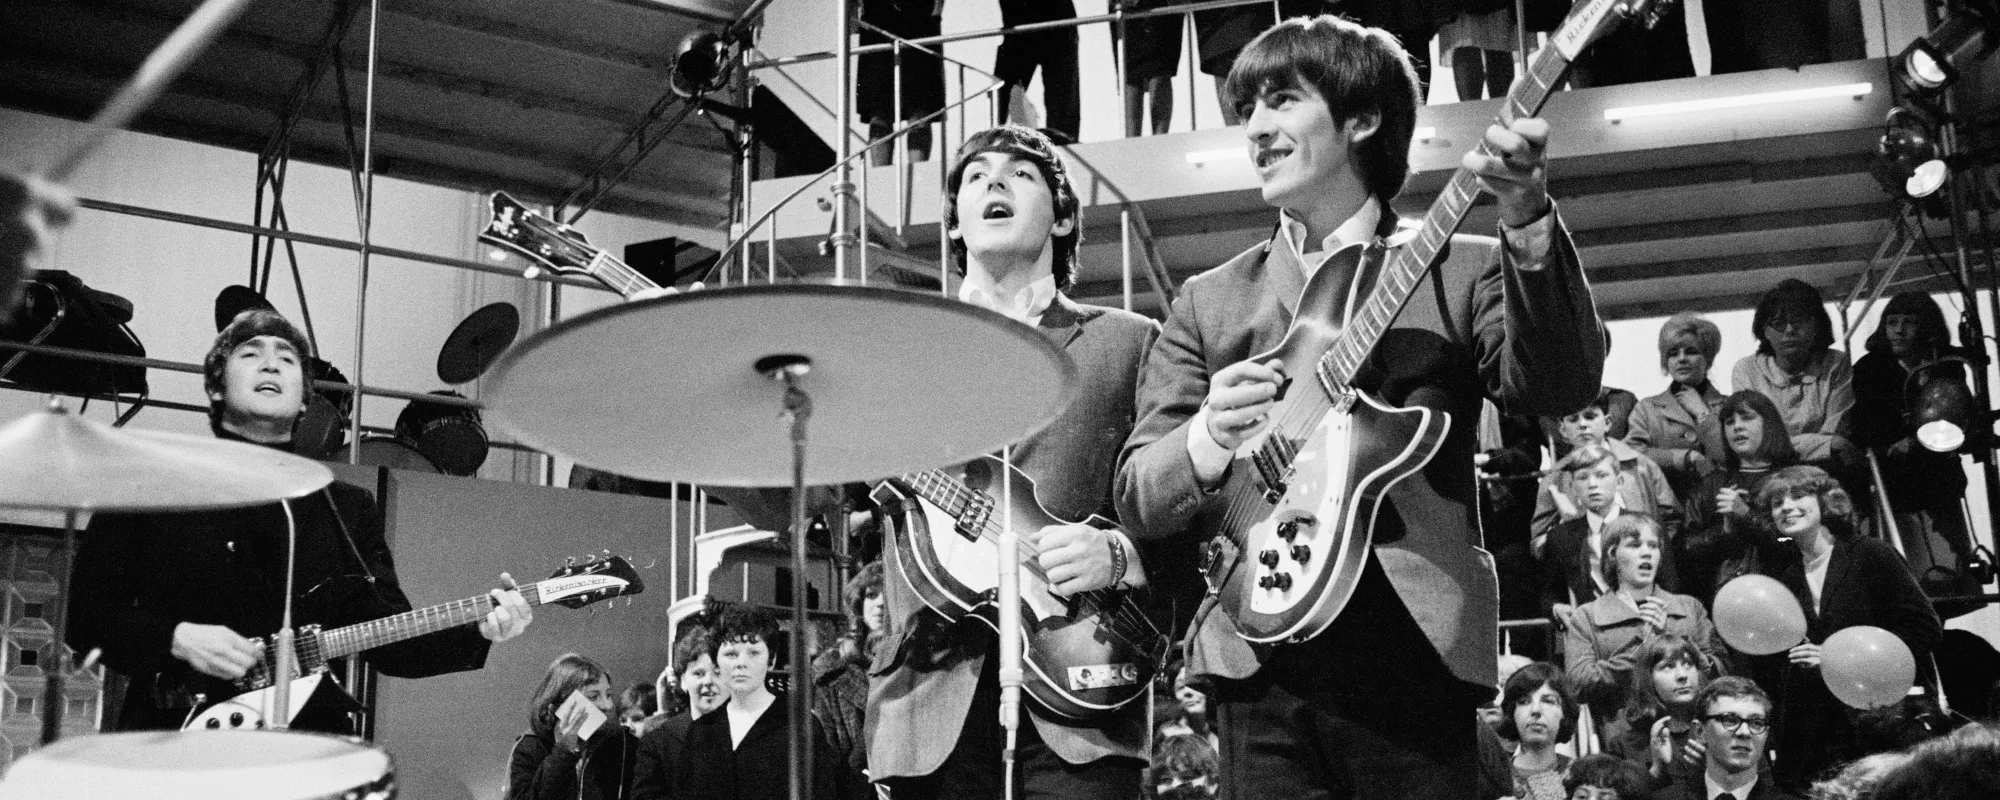 The Story Behind “I Saw Her Standing There” by The Beatles and the Bass Line Paul McCartney Borrowed from Chuck Berry